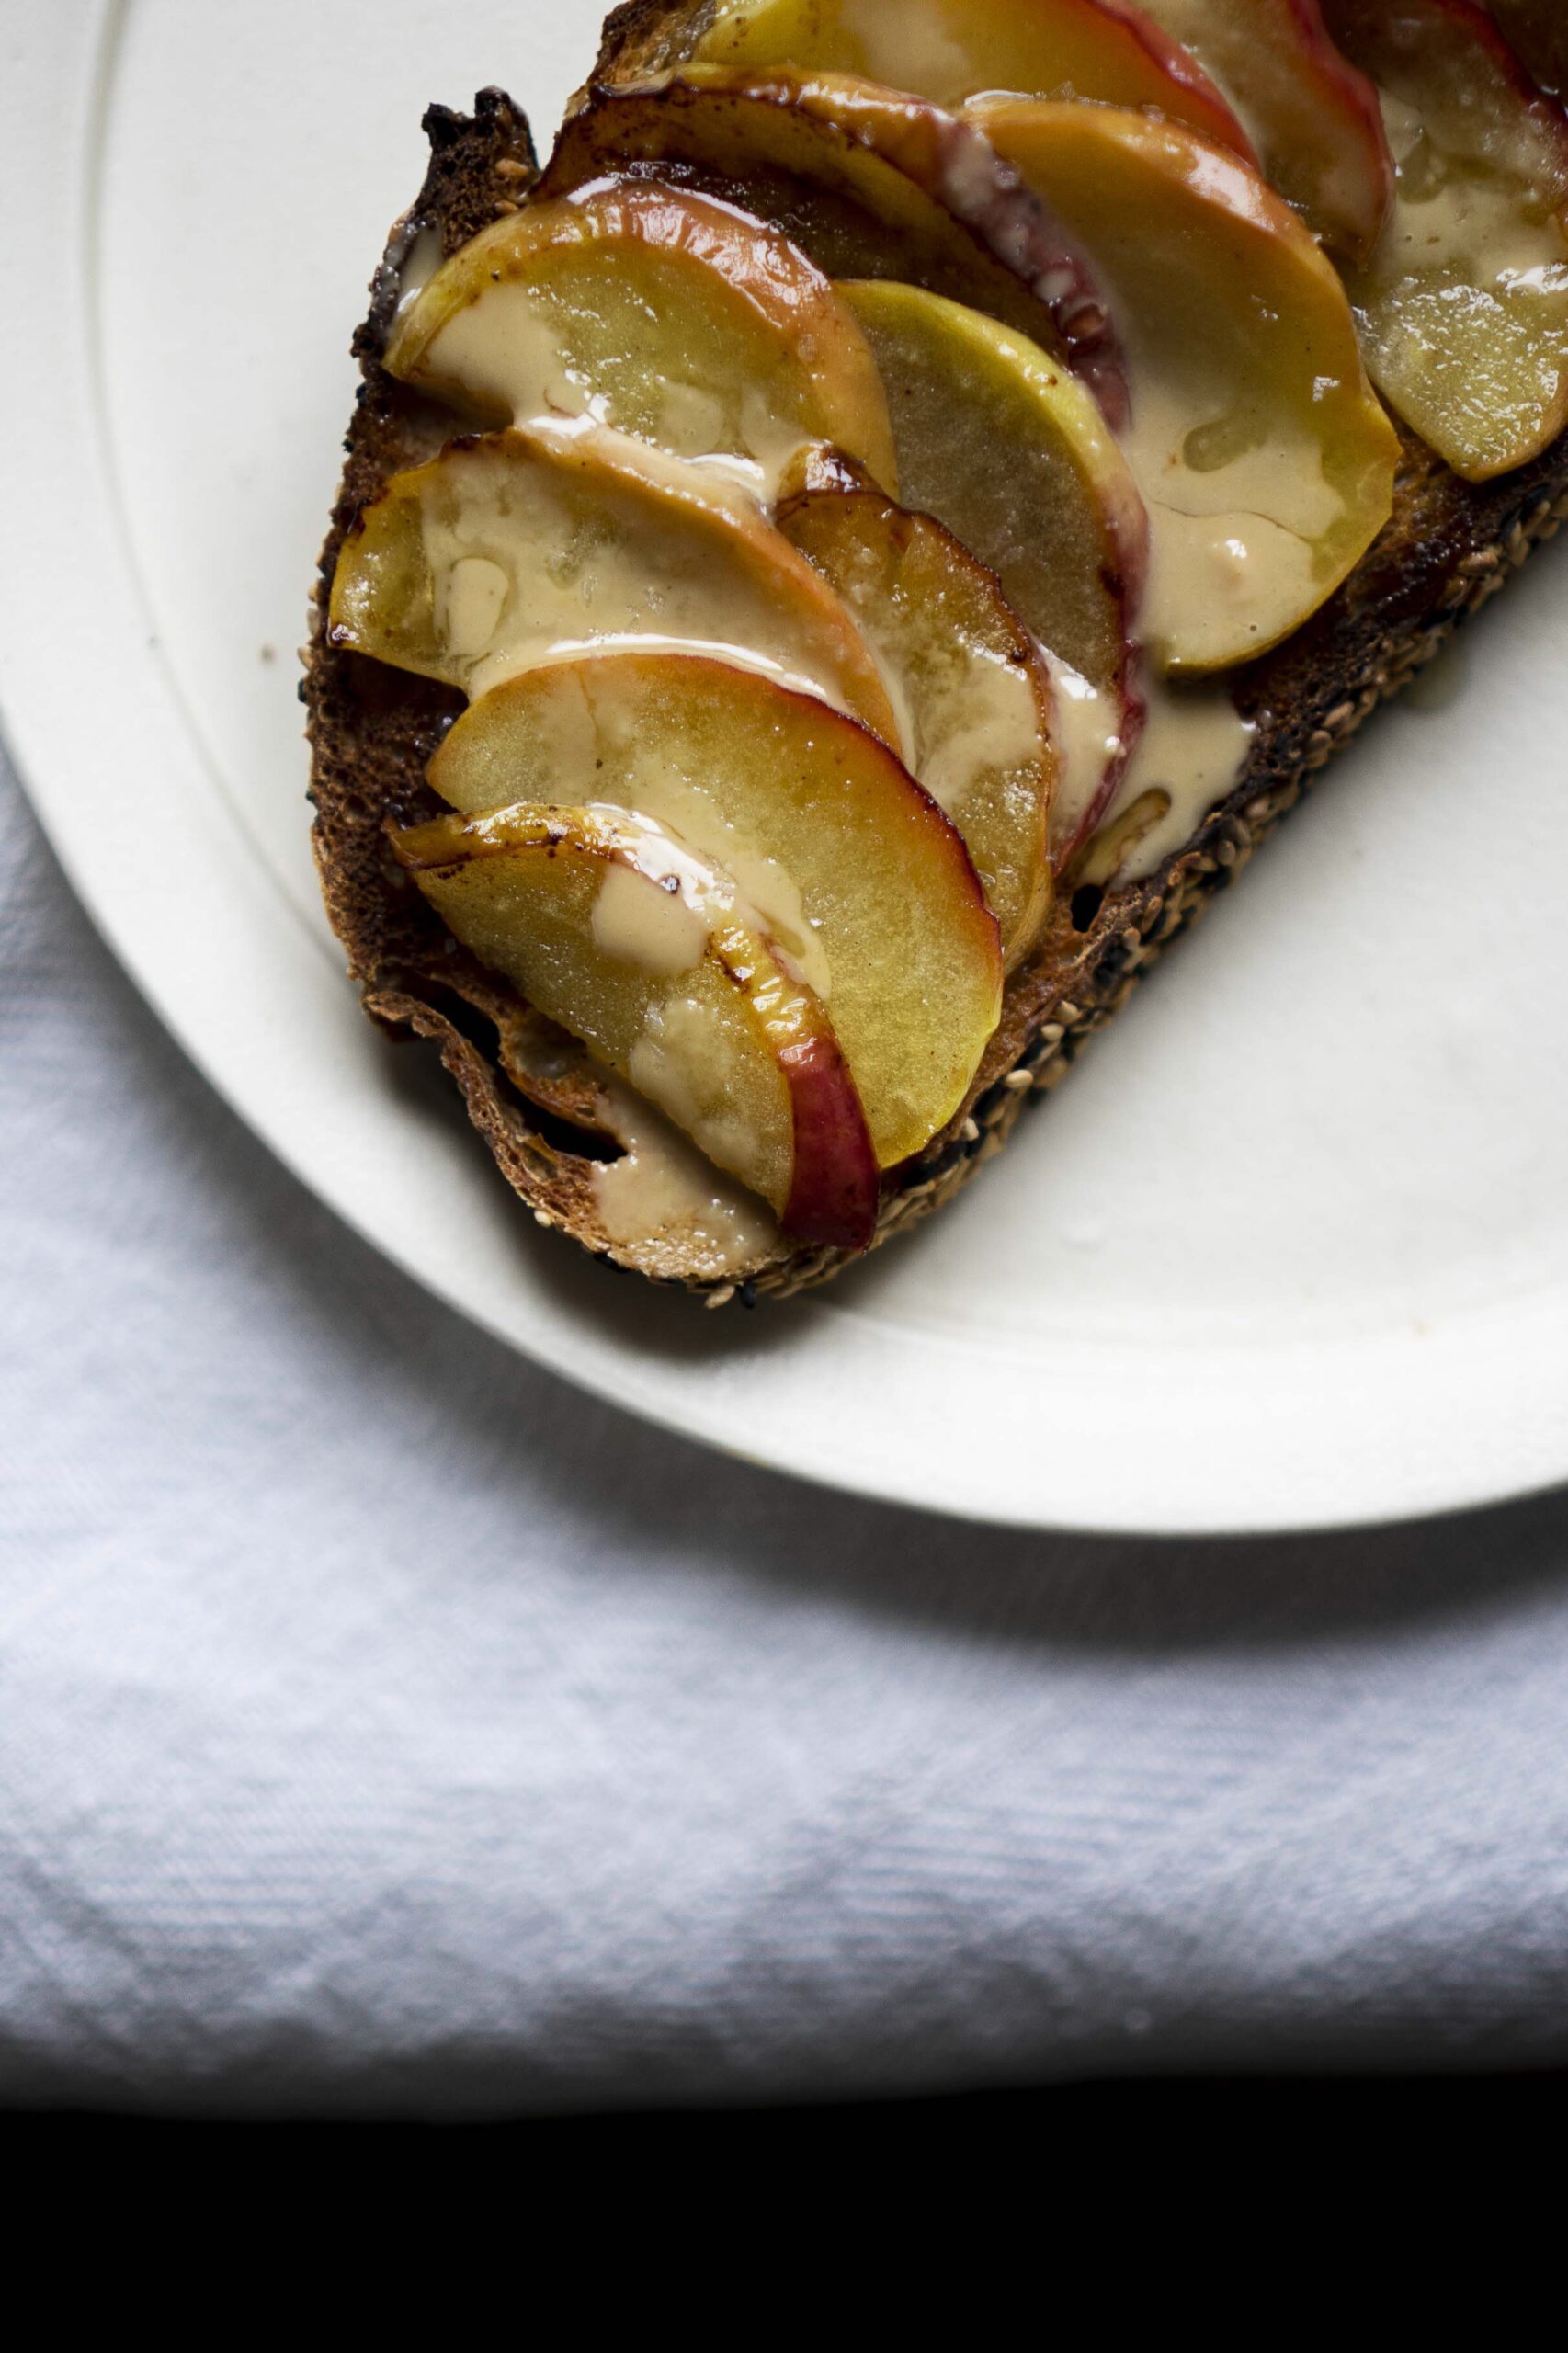 Apple and sesame on bread